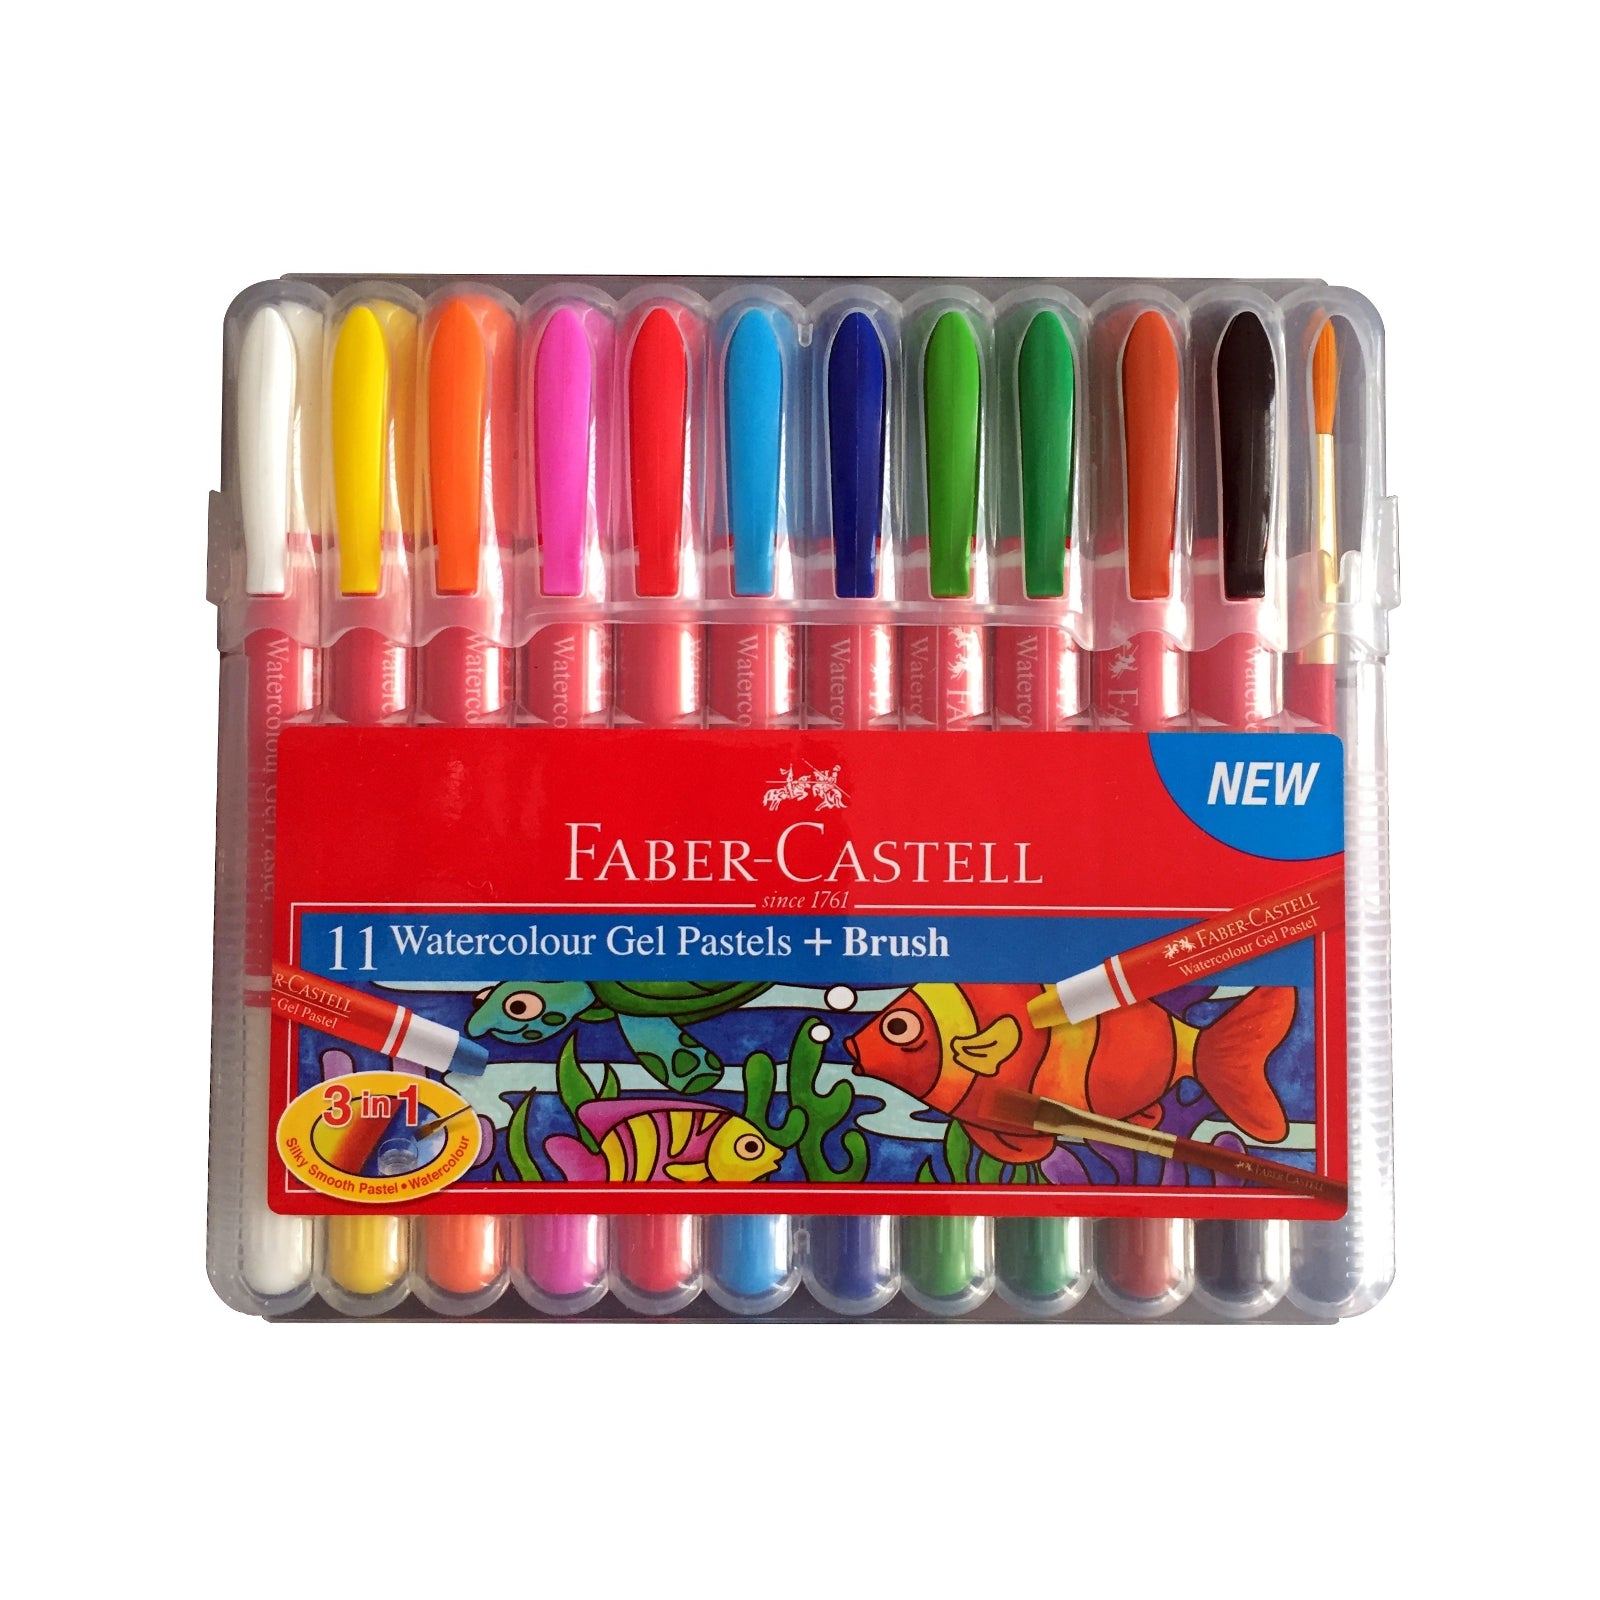 Faber Castell Watercolour Gel Pastels Box of 11 - Me Books Store